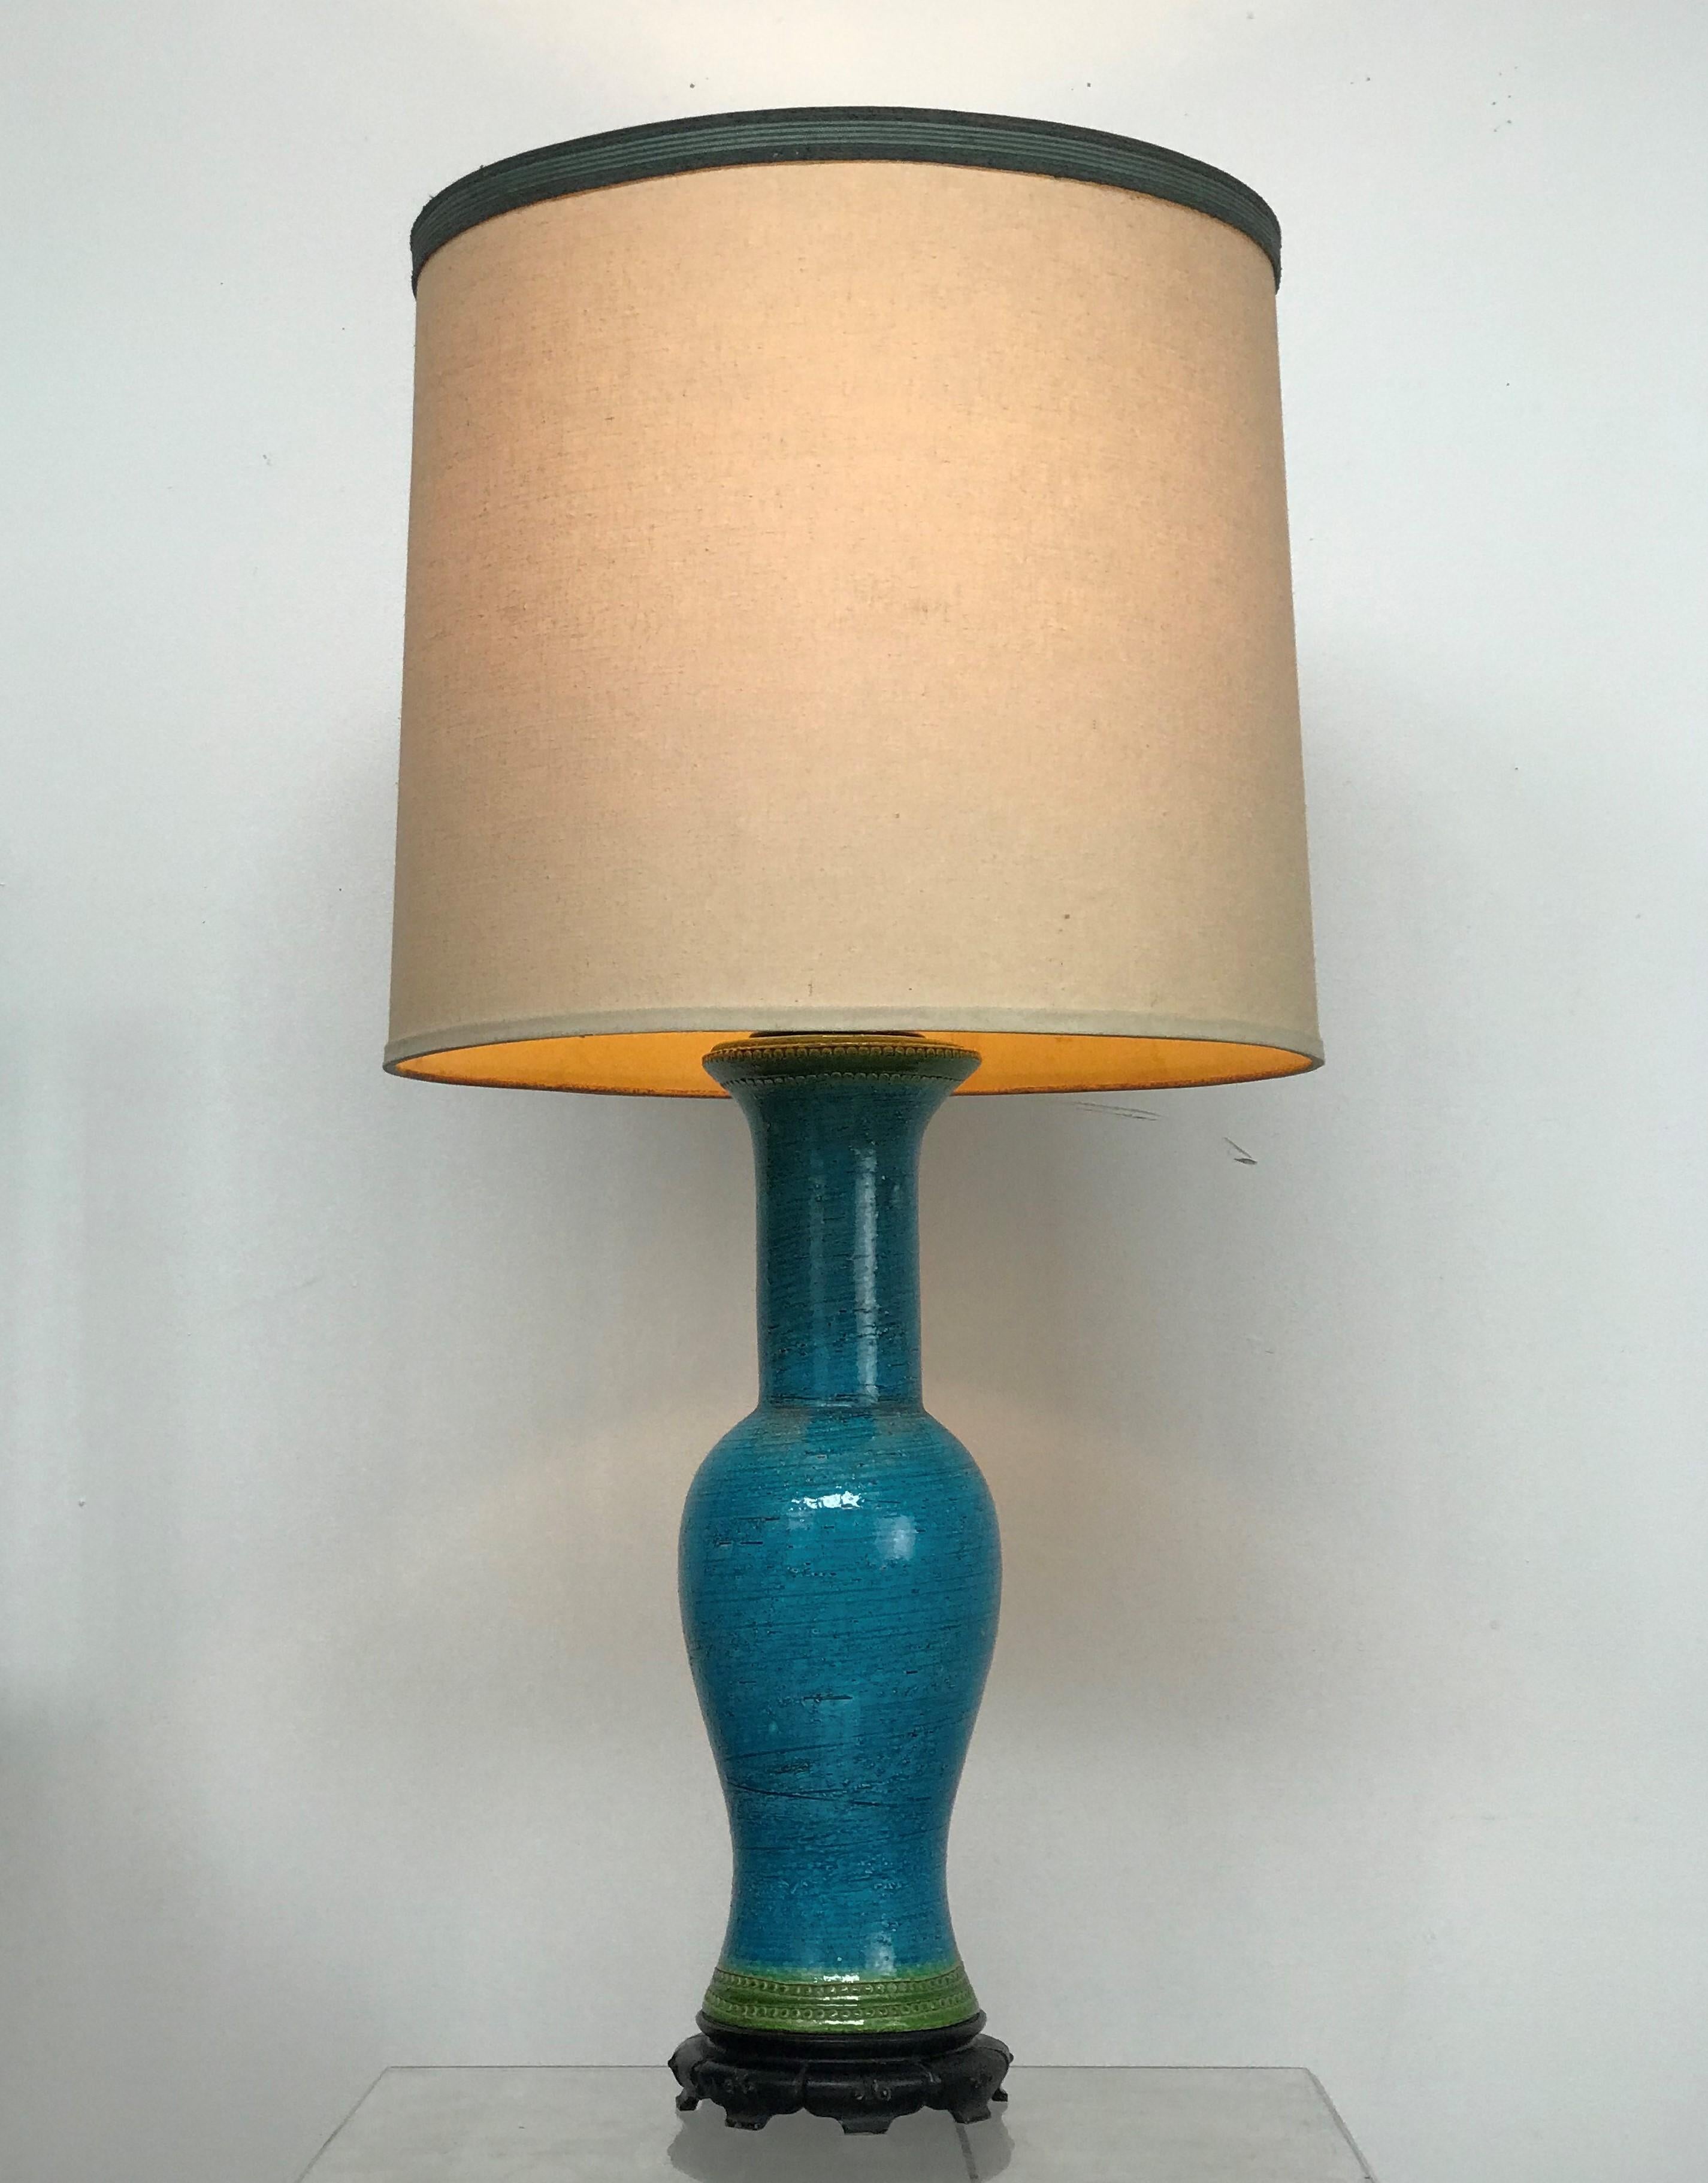 Lovely 1960's large ceramic blue & green Italian modern lamp by Bitossi combined with a Chinoiserie iron base for Wilmar Lighting. Excellent condition. No chips or cracks or any blemishes. 

The shade is not included - it has a lot of wear. The